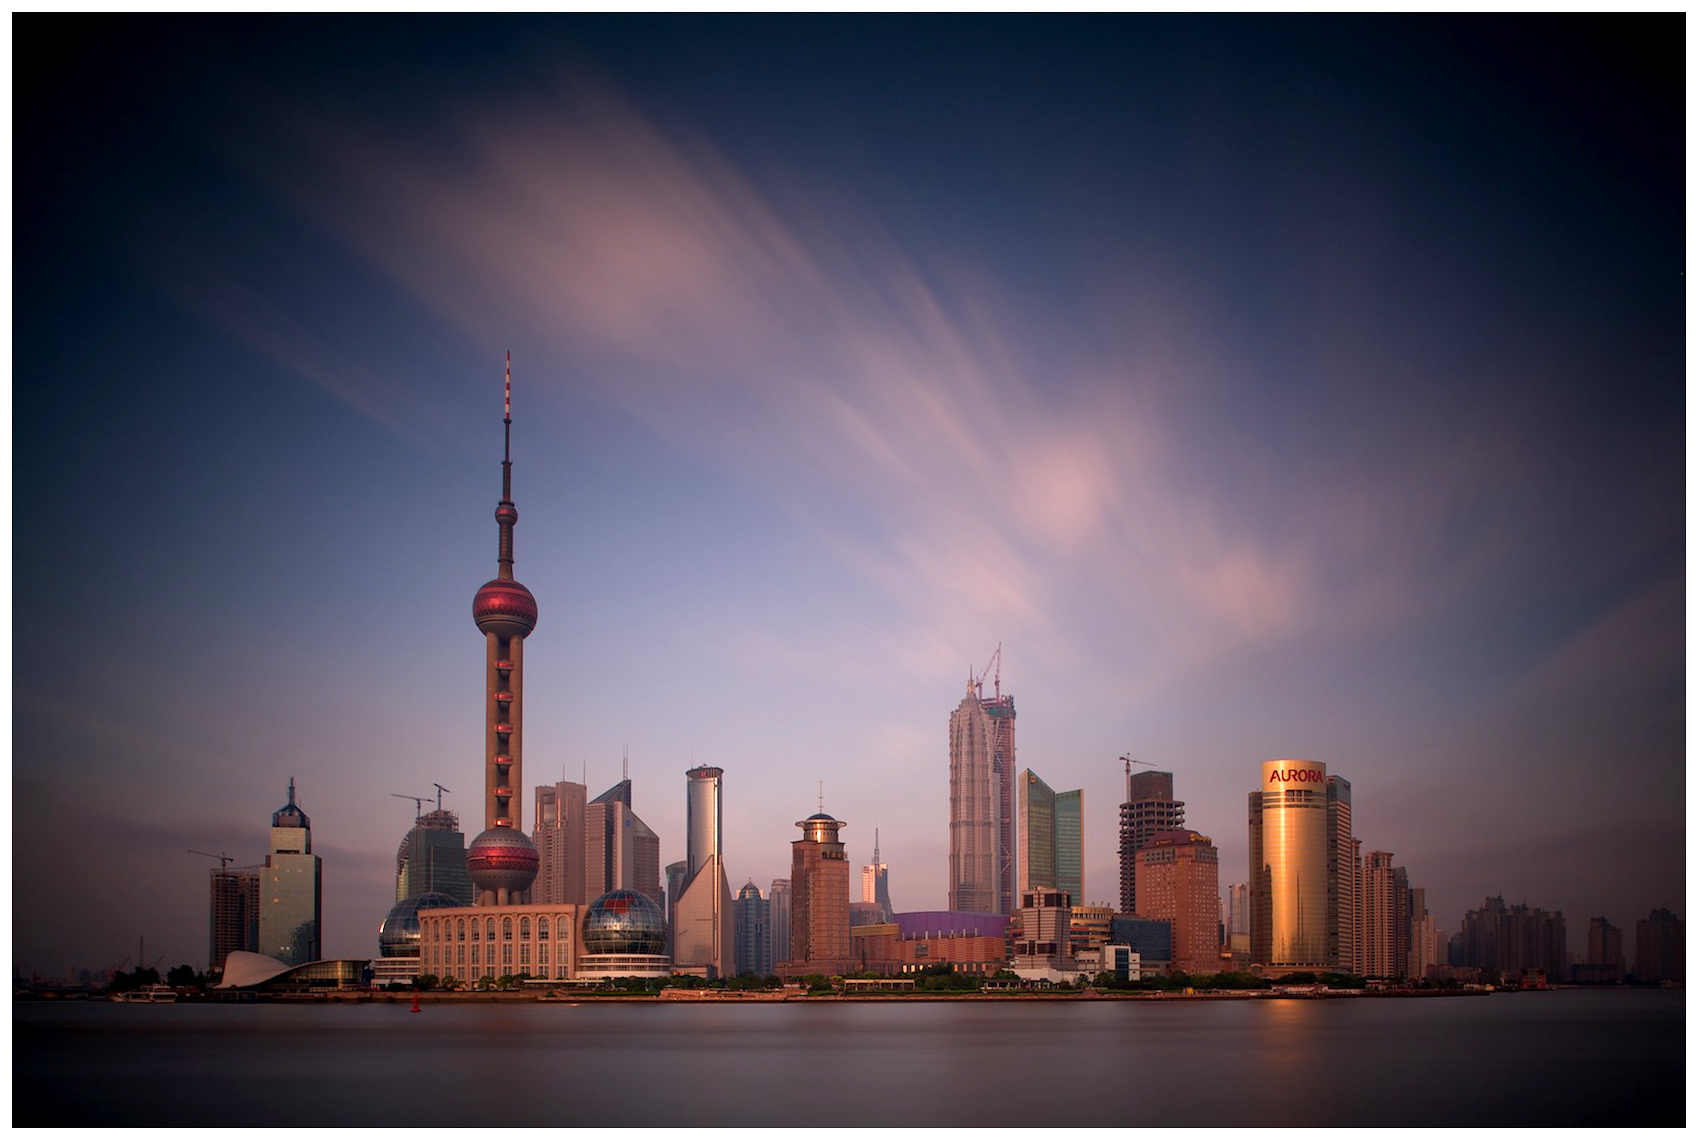 Pudong skyline in Shanghai, China